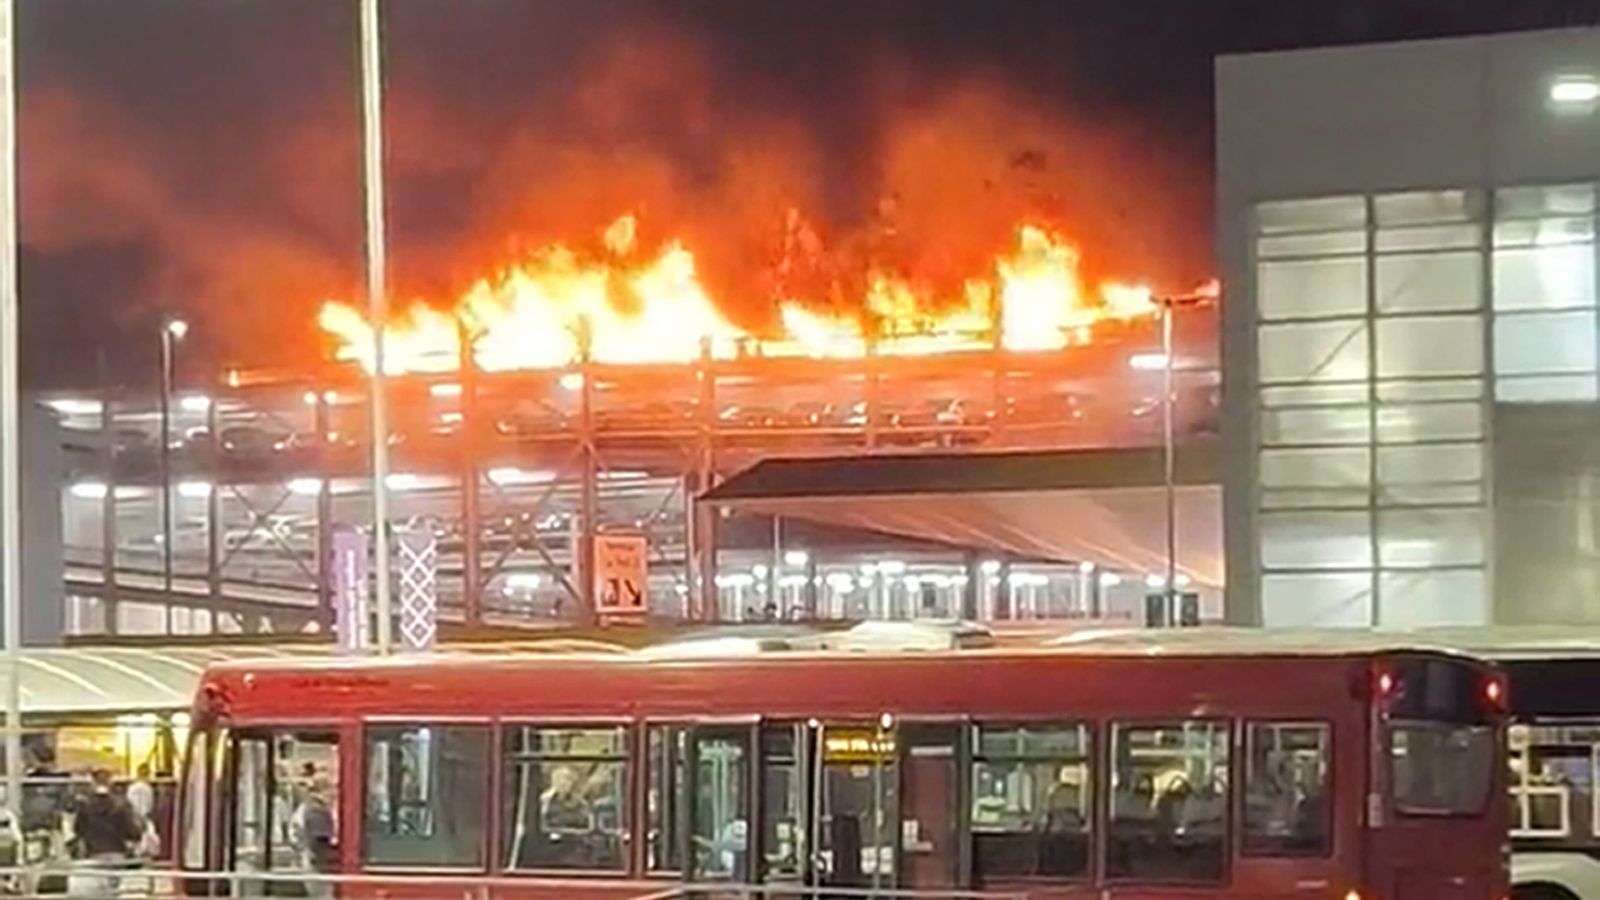 Luton Airport fire that damaged 1,500 cars started 'due to vehicle fault' - as man arrested